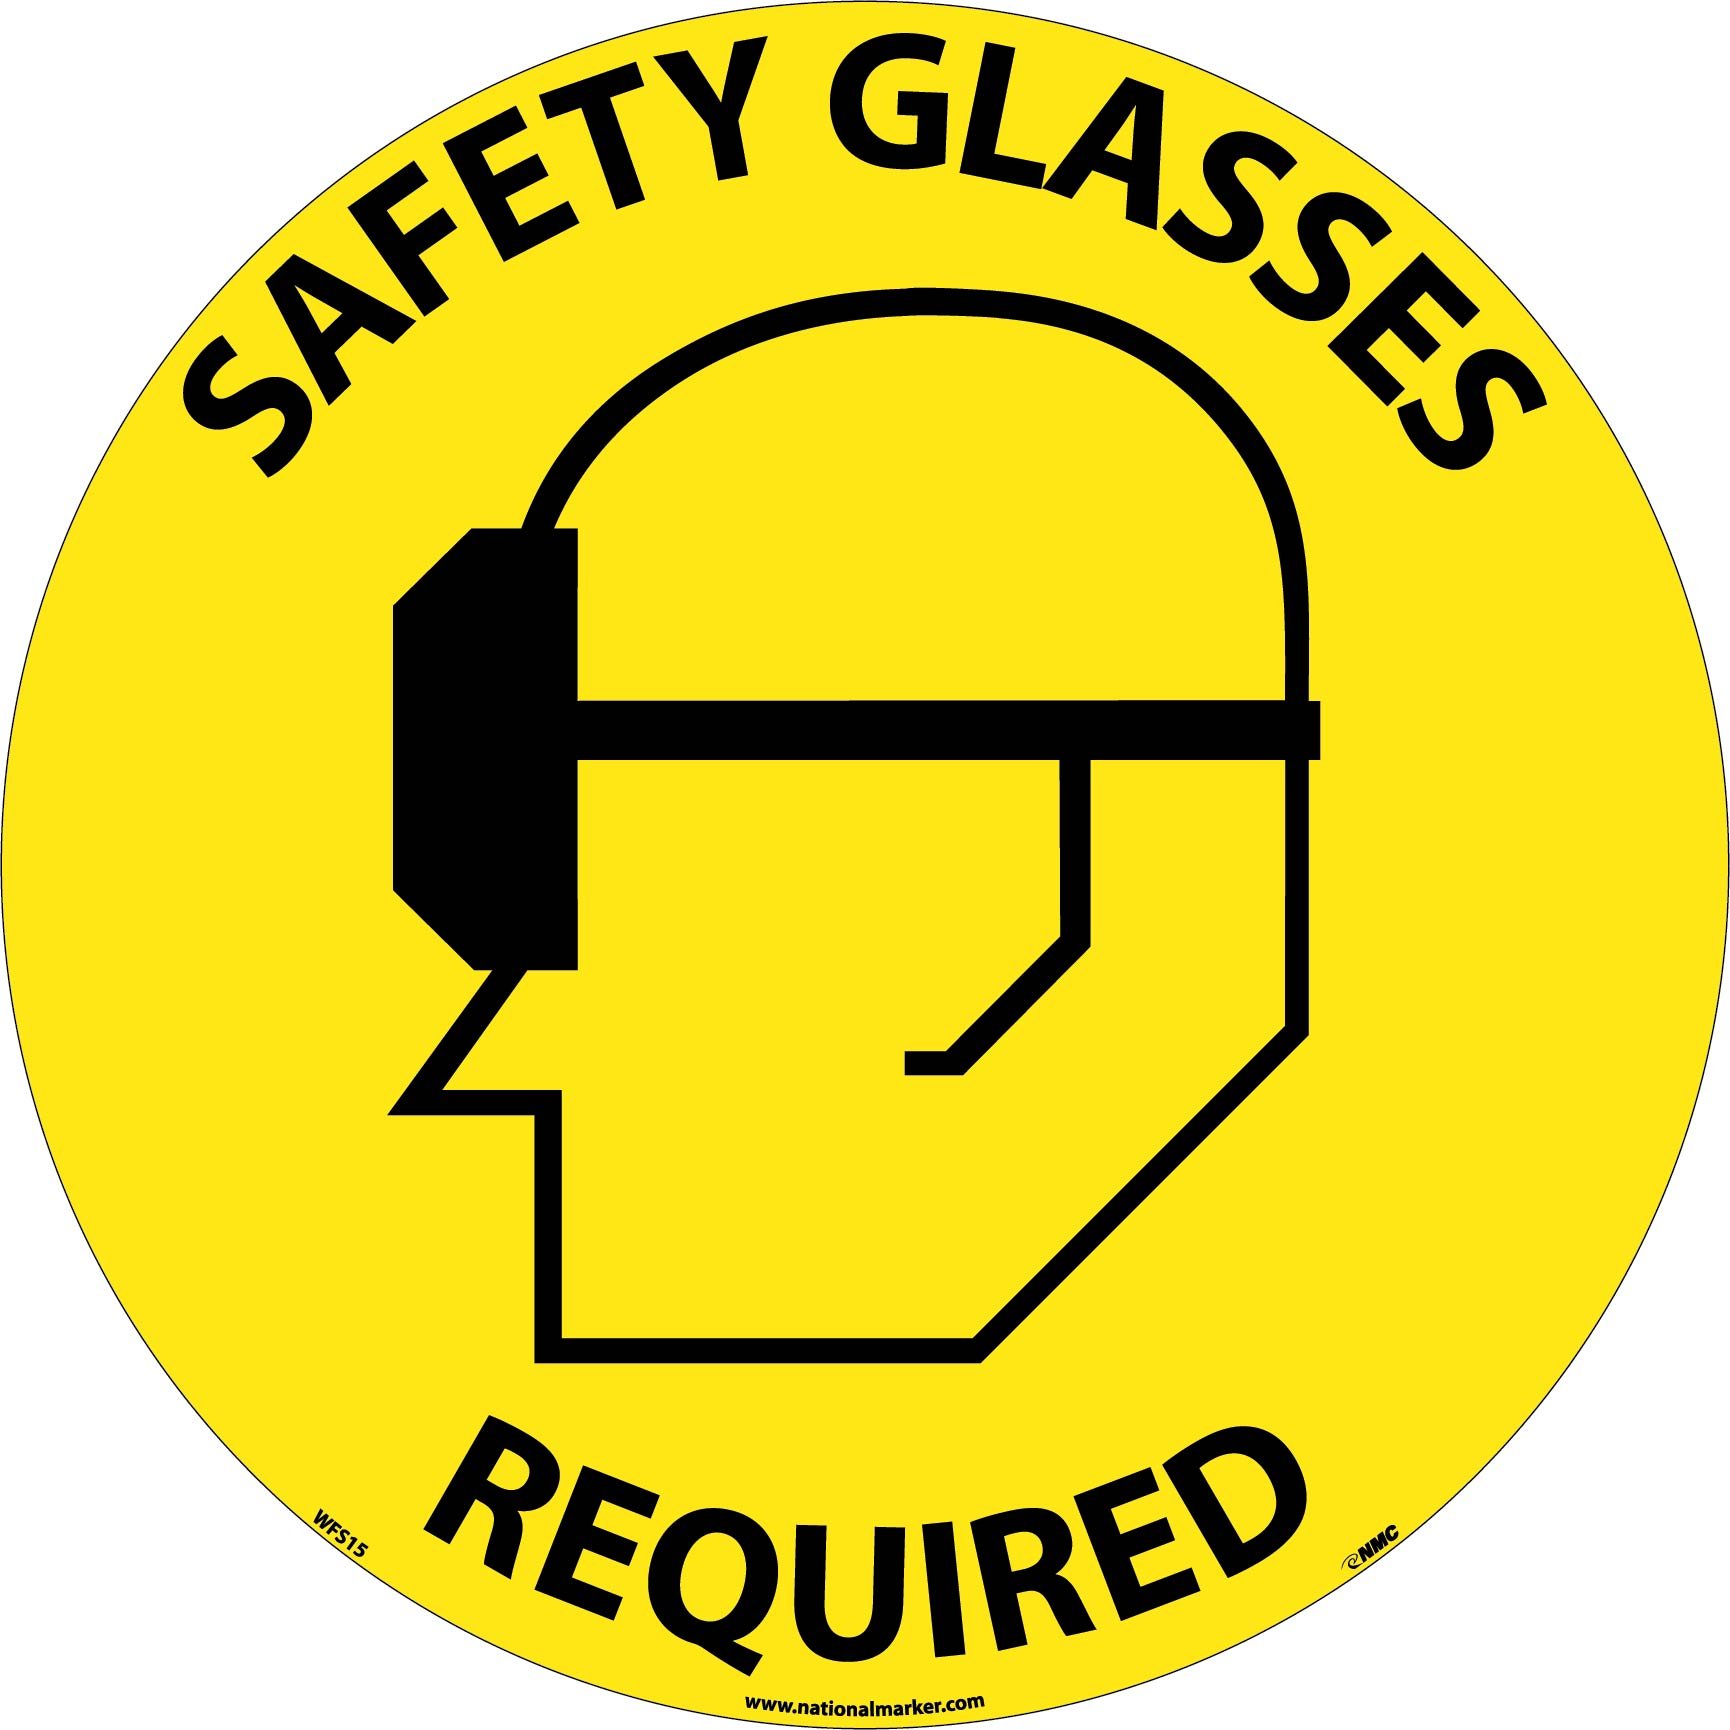 free clipart school safety - photo #45